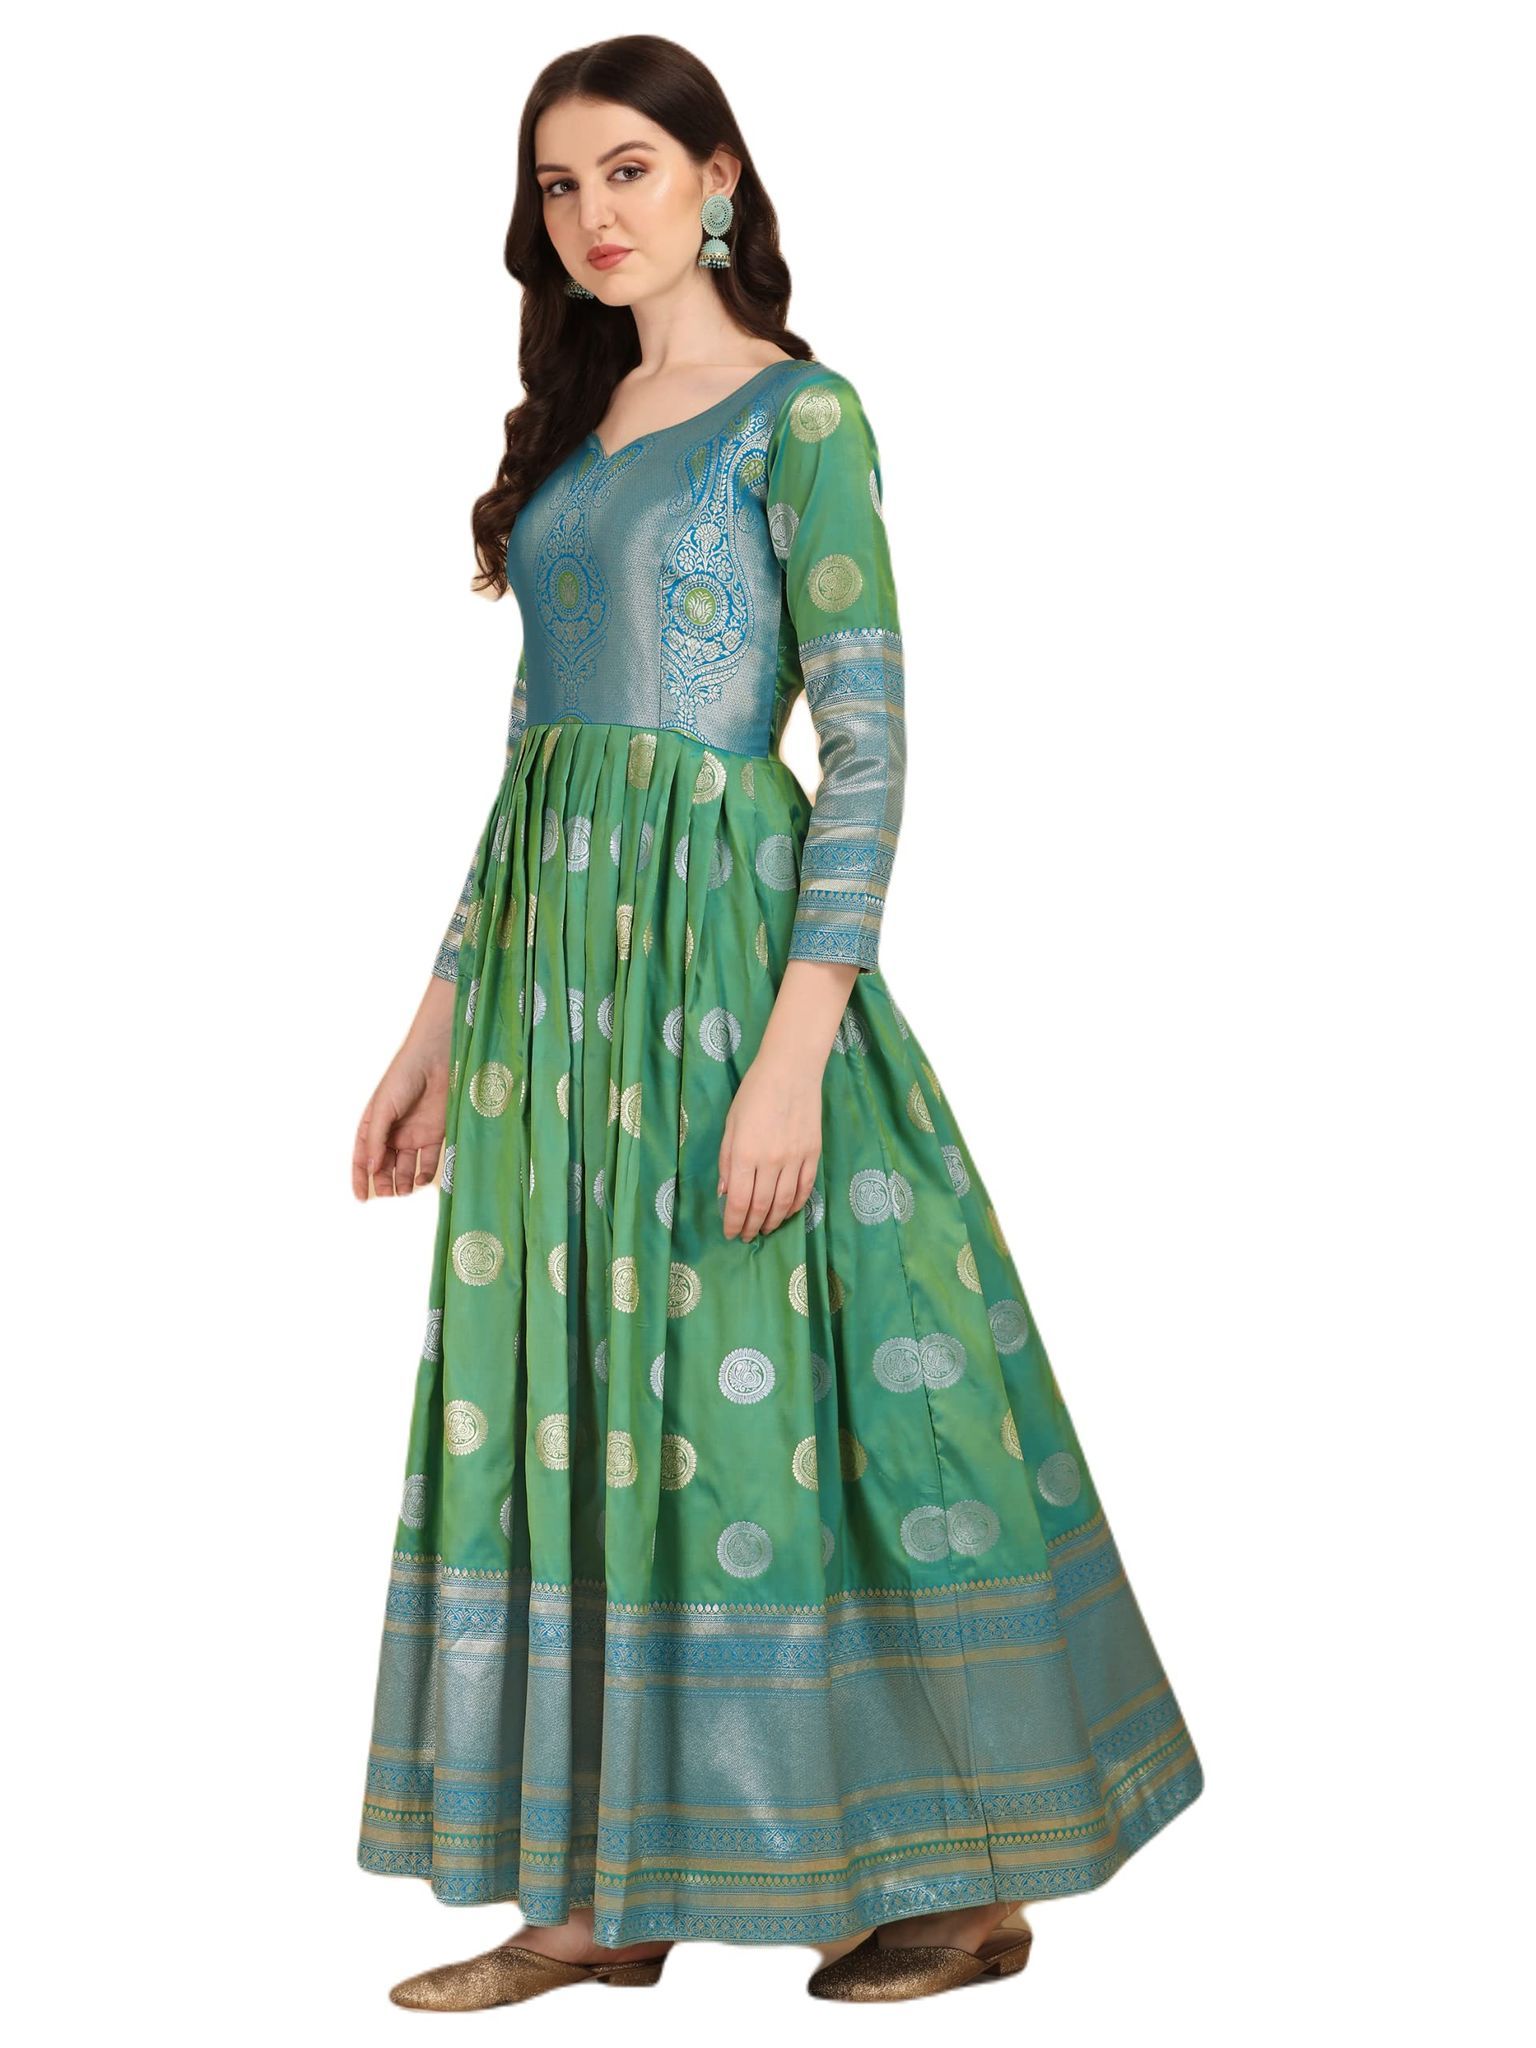 Gowns for Women - Indian Long Gown Dress Designs @ Best Prices